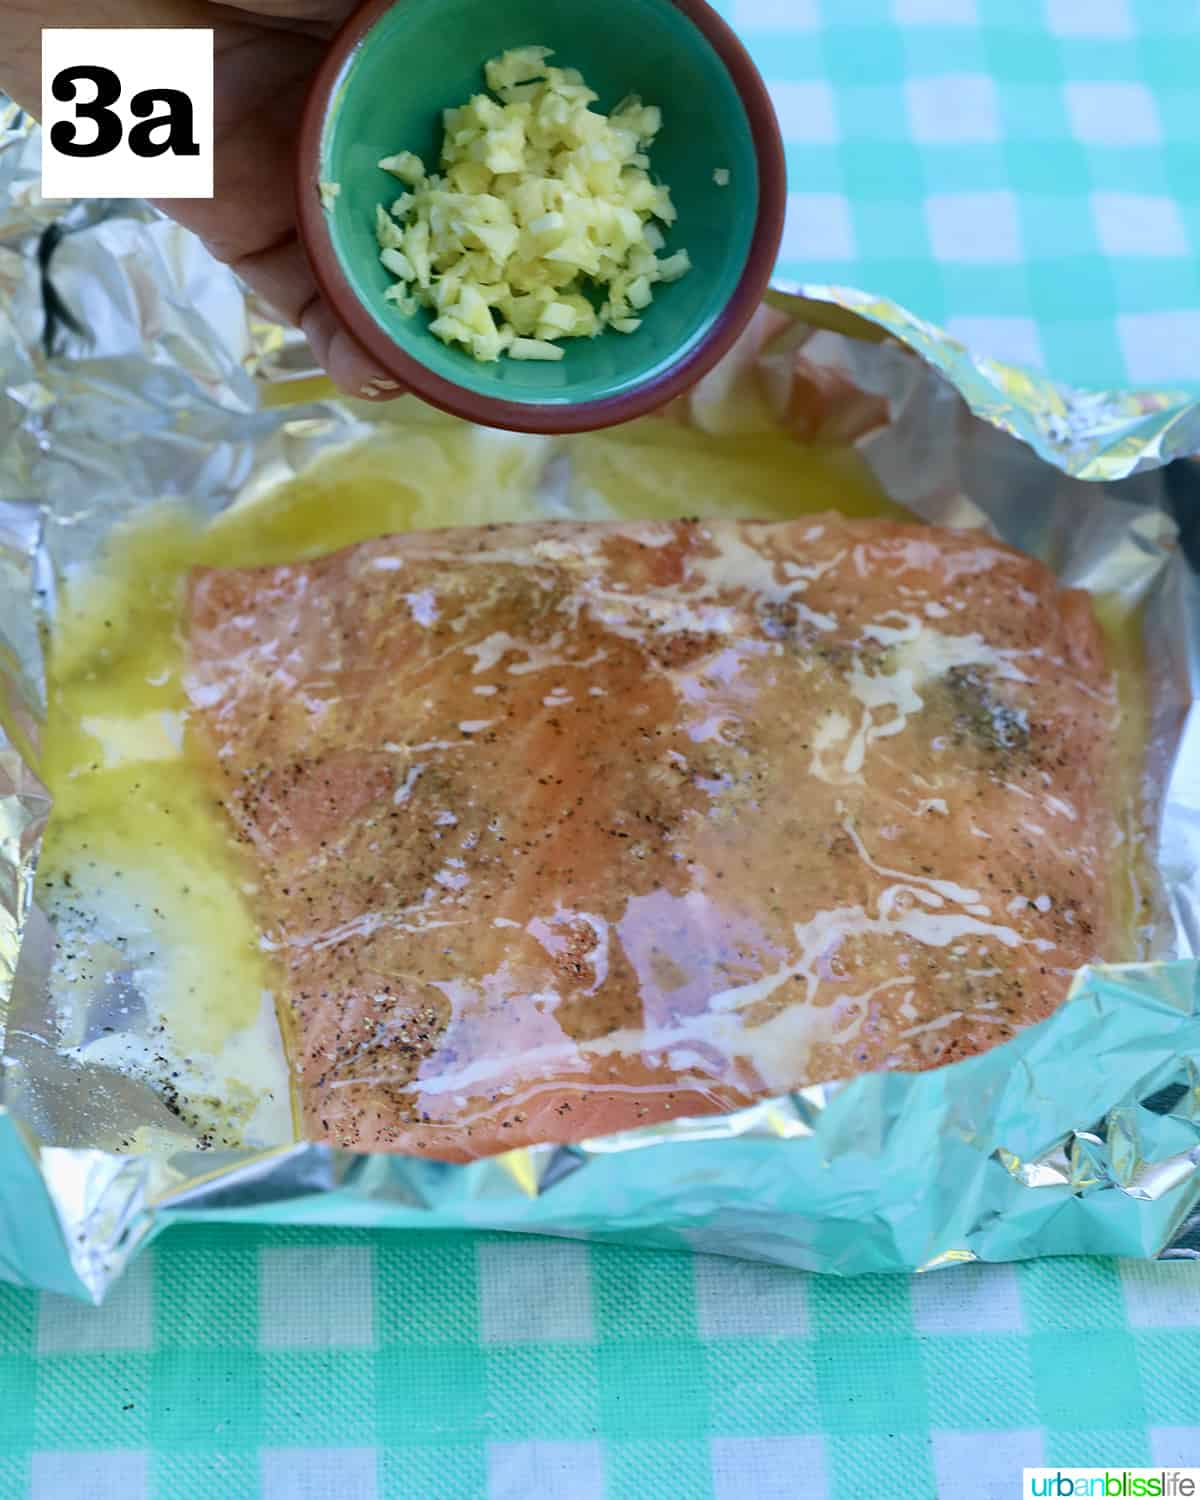 bowl of garlic added to seasoned salmon in foil on a checkered tablecloth.